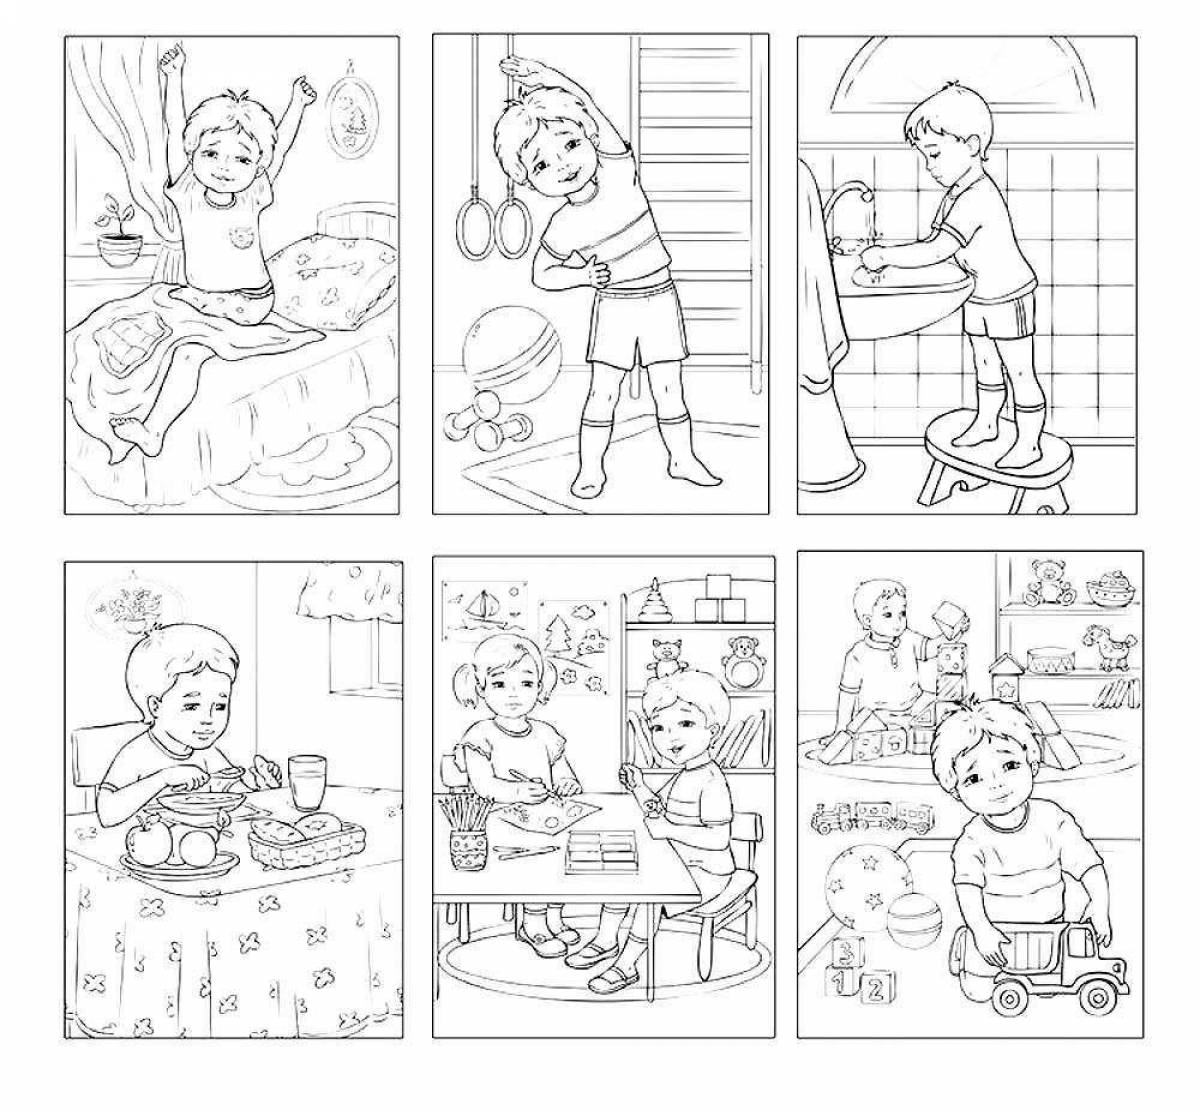 Colouring page of student everyday life